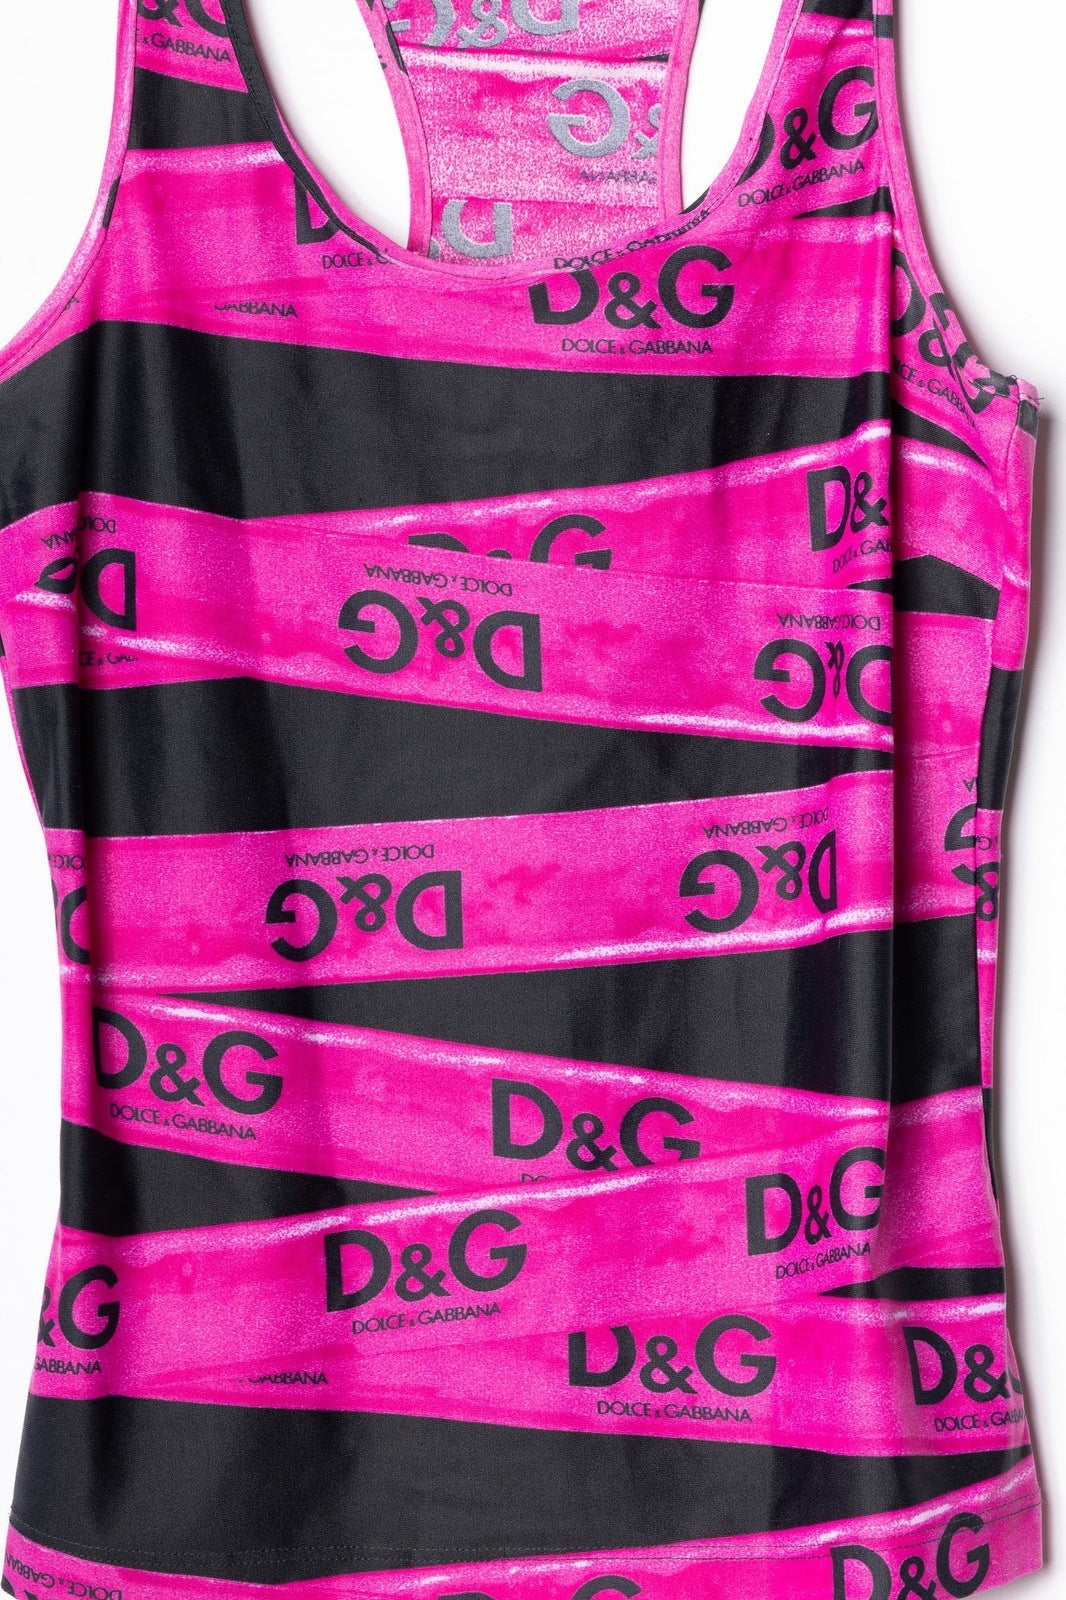 D&G Pink/Black Caution Tape Tank - Black/pink color, XS 24/38. Stretchy bathing suit material. Good vintage condition.